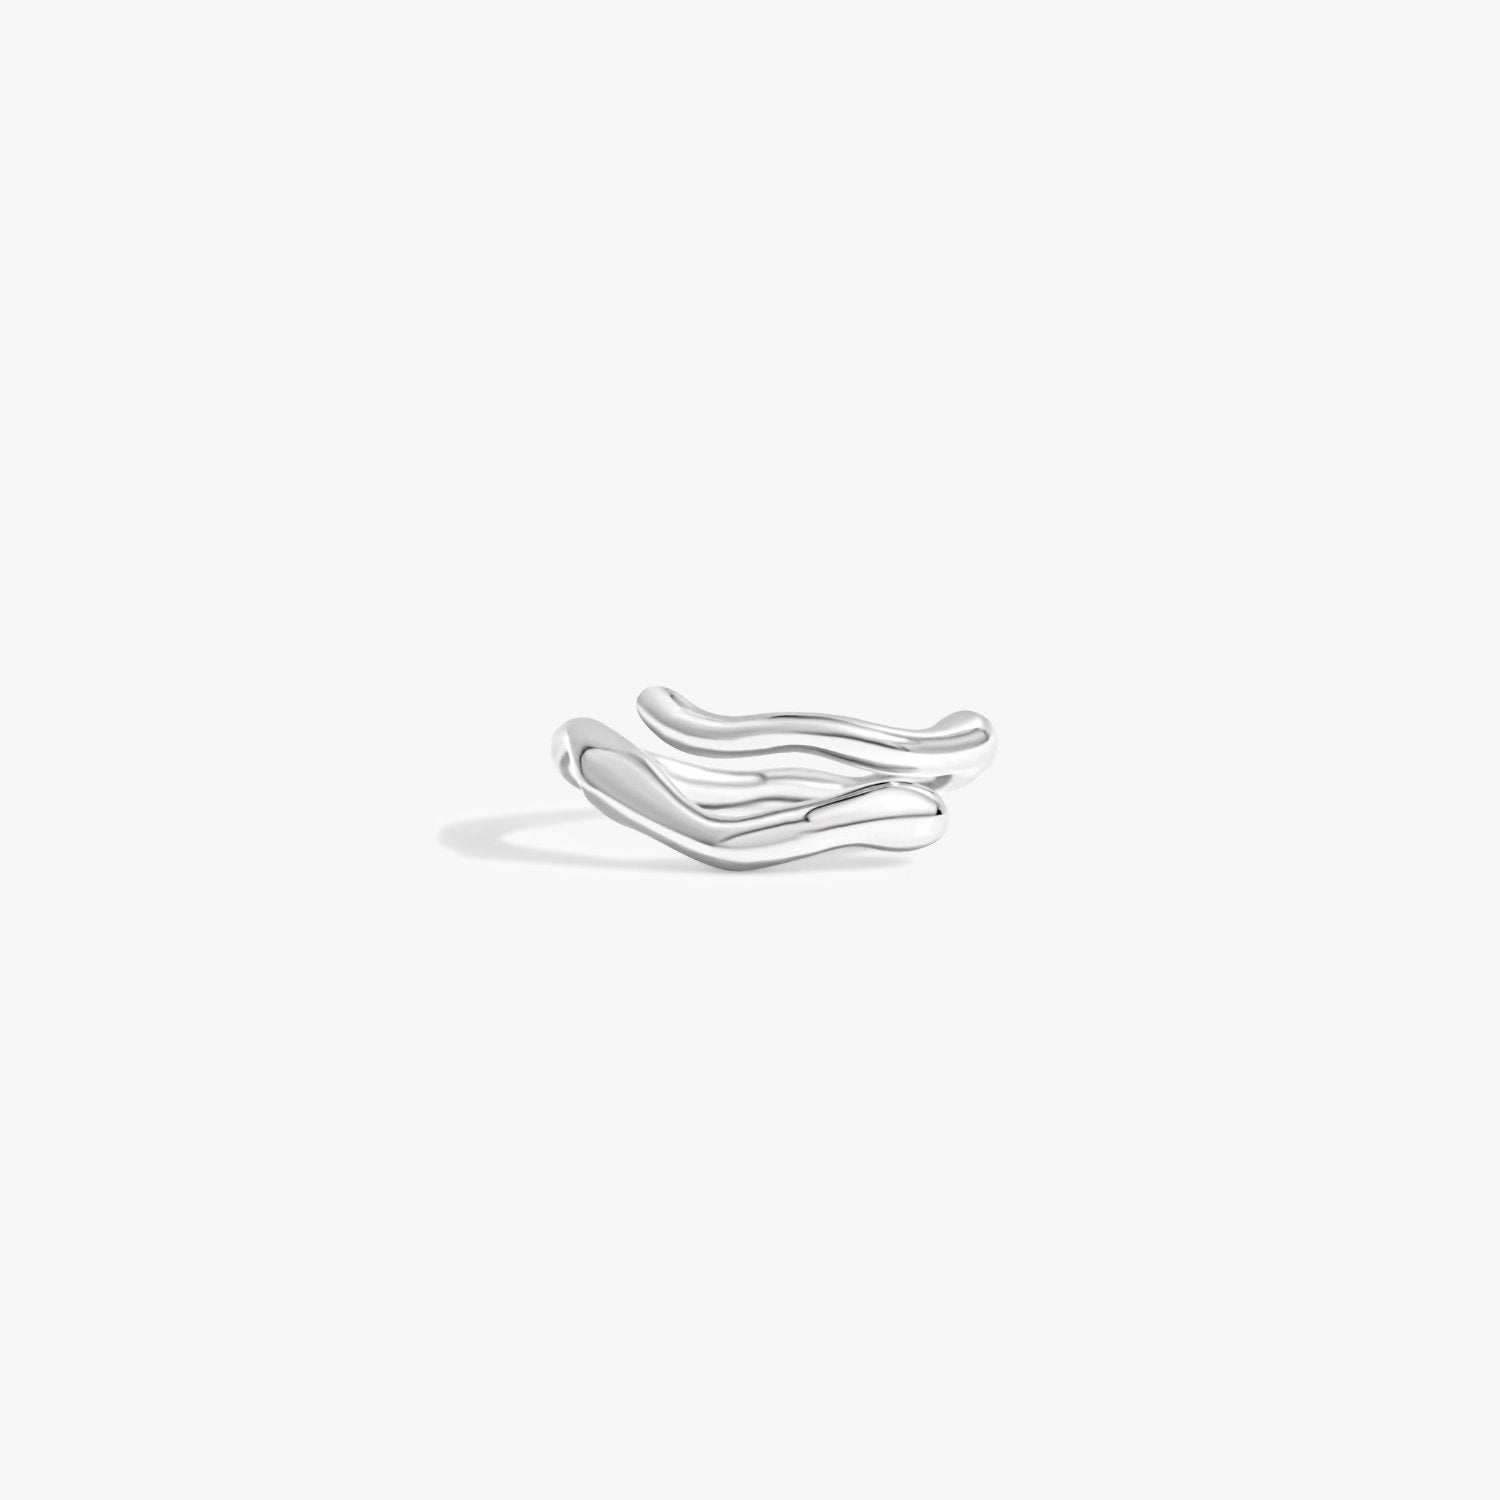 Organic Criss Cross Adjustable Sterling Silver Ring - Flaire & Co.